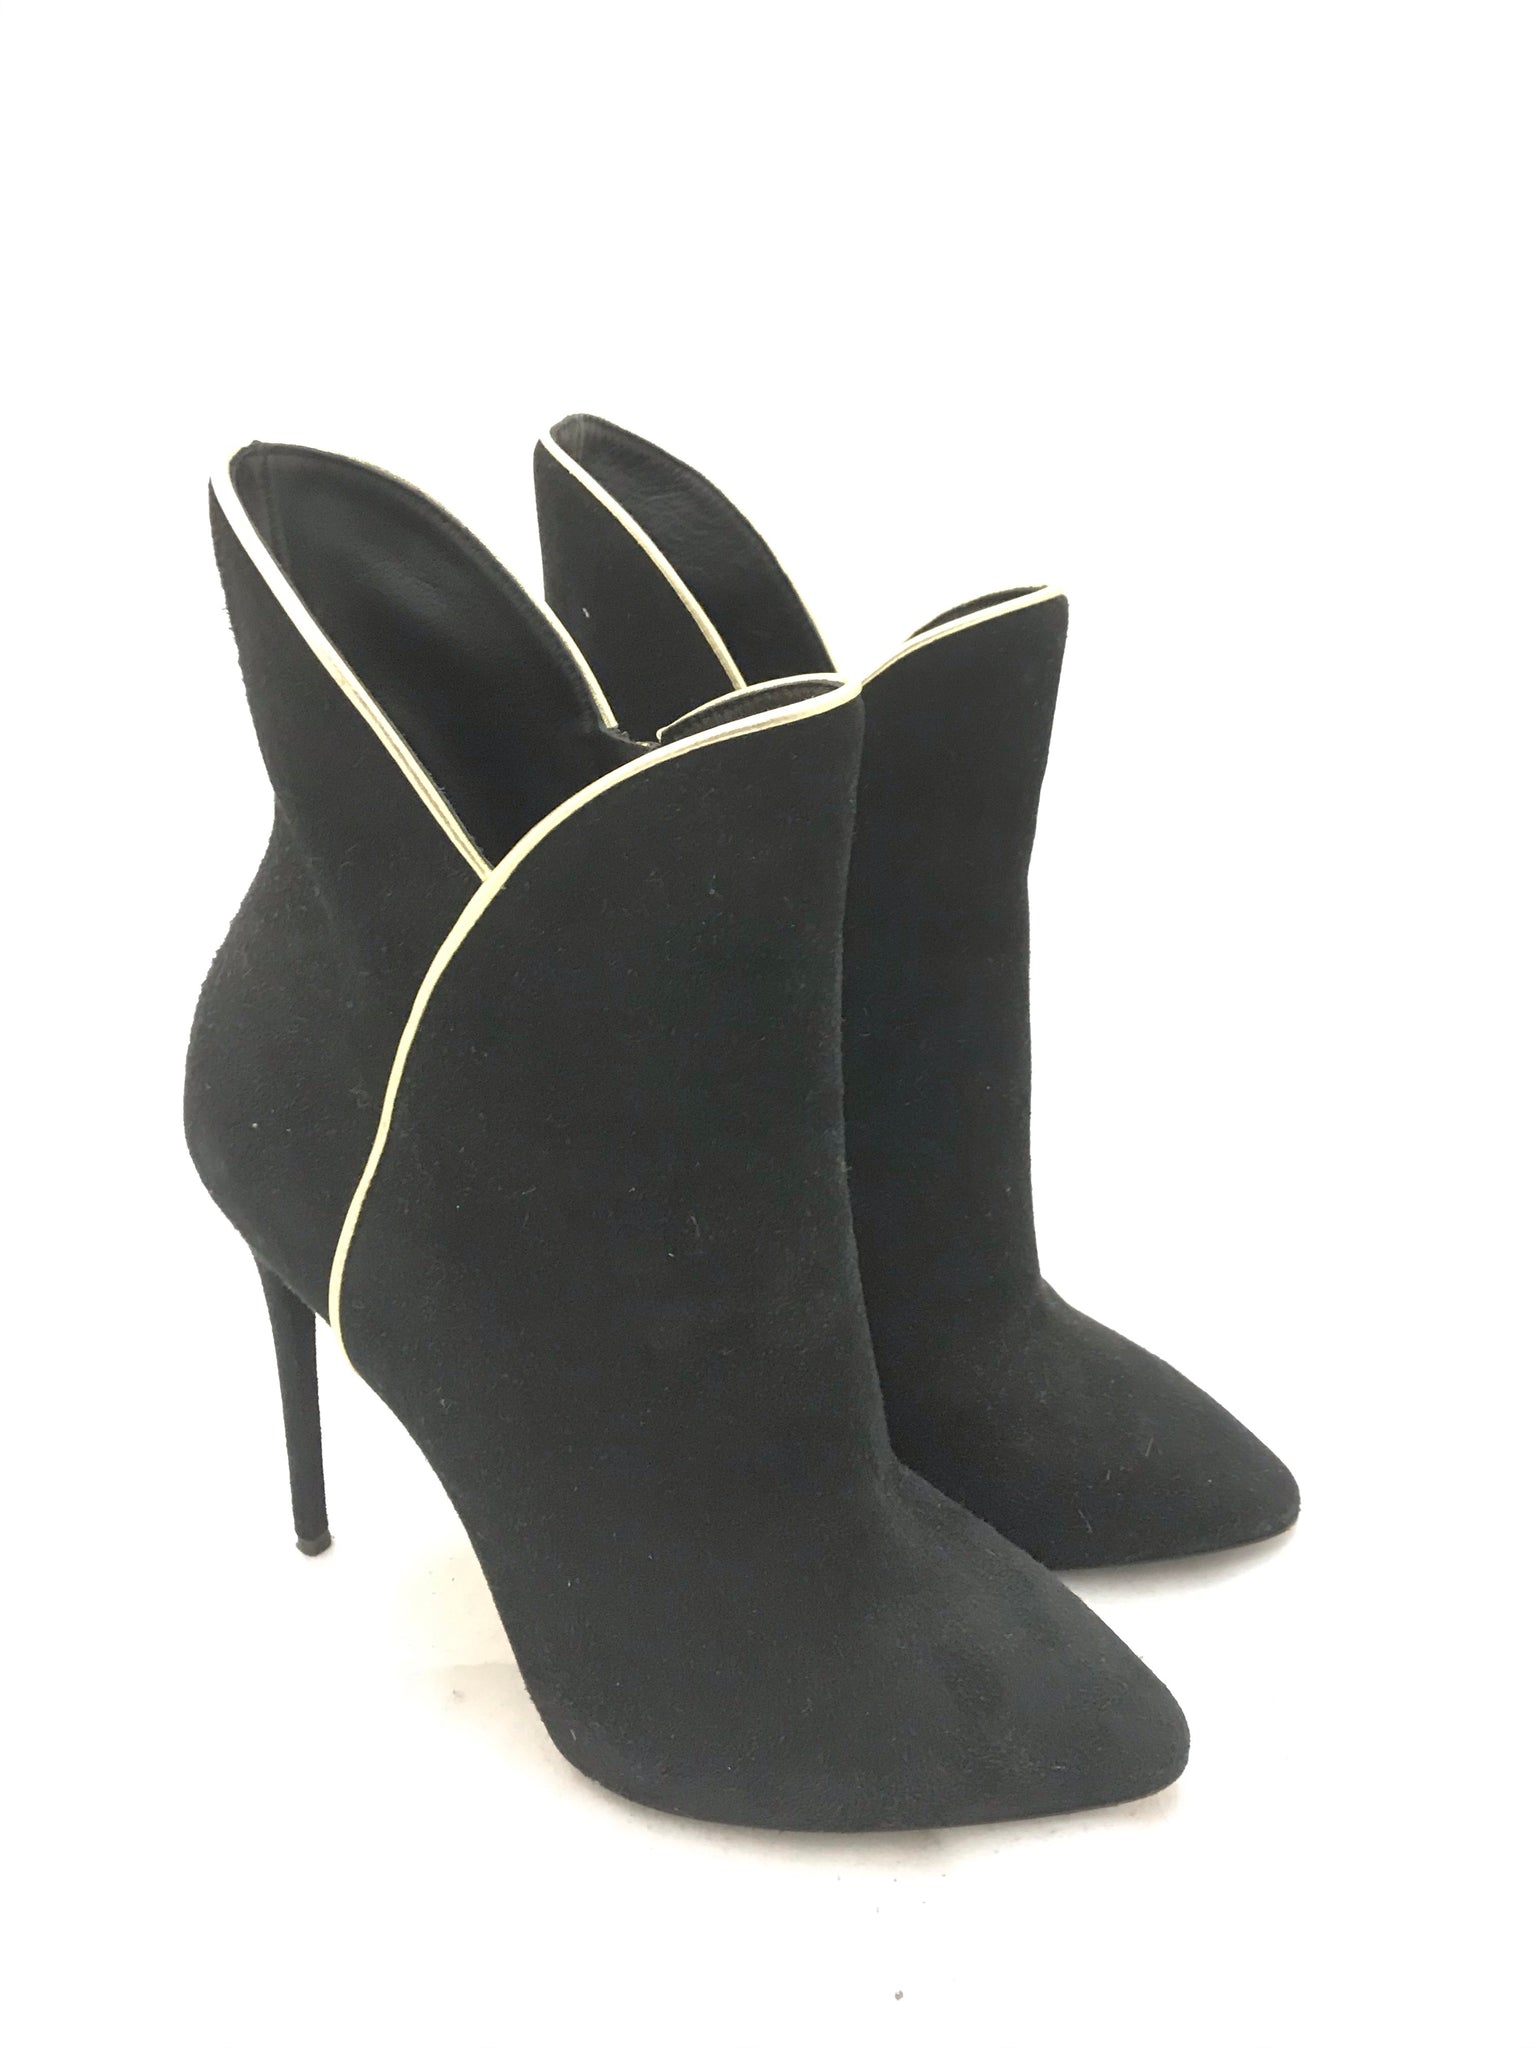 Isabella's Wardrobe Giuseppe Zanotti Suede Shoeboots with Gold Piping.